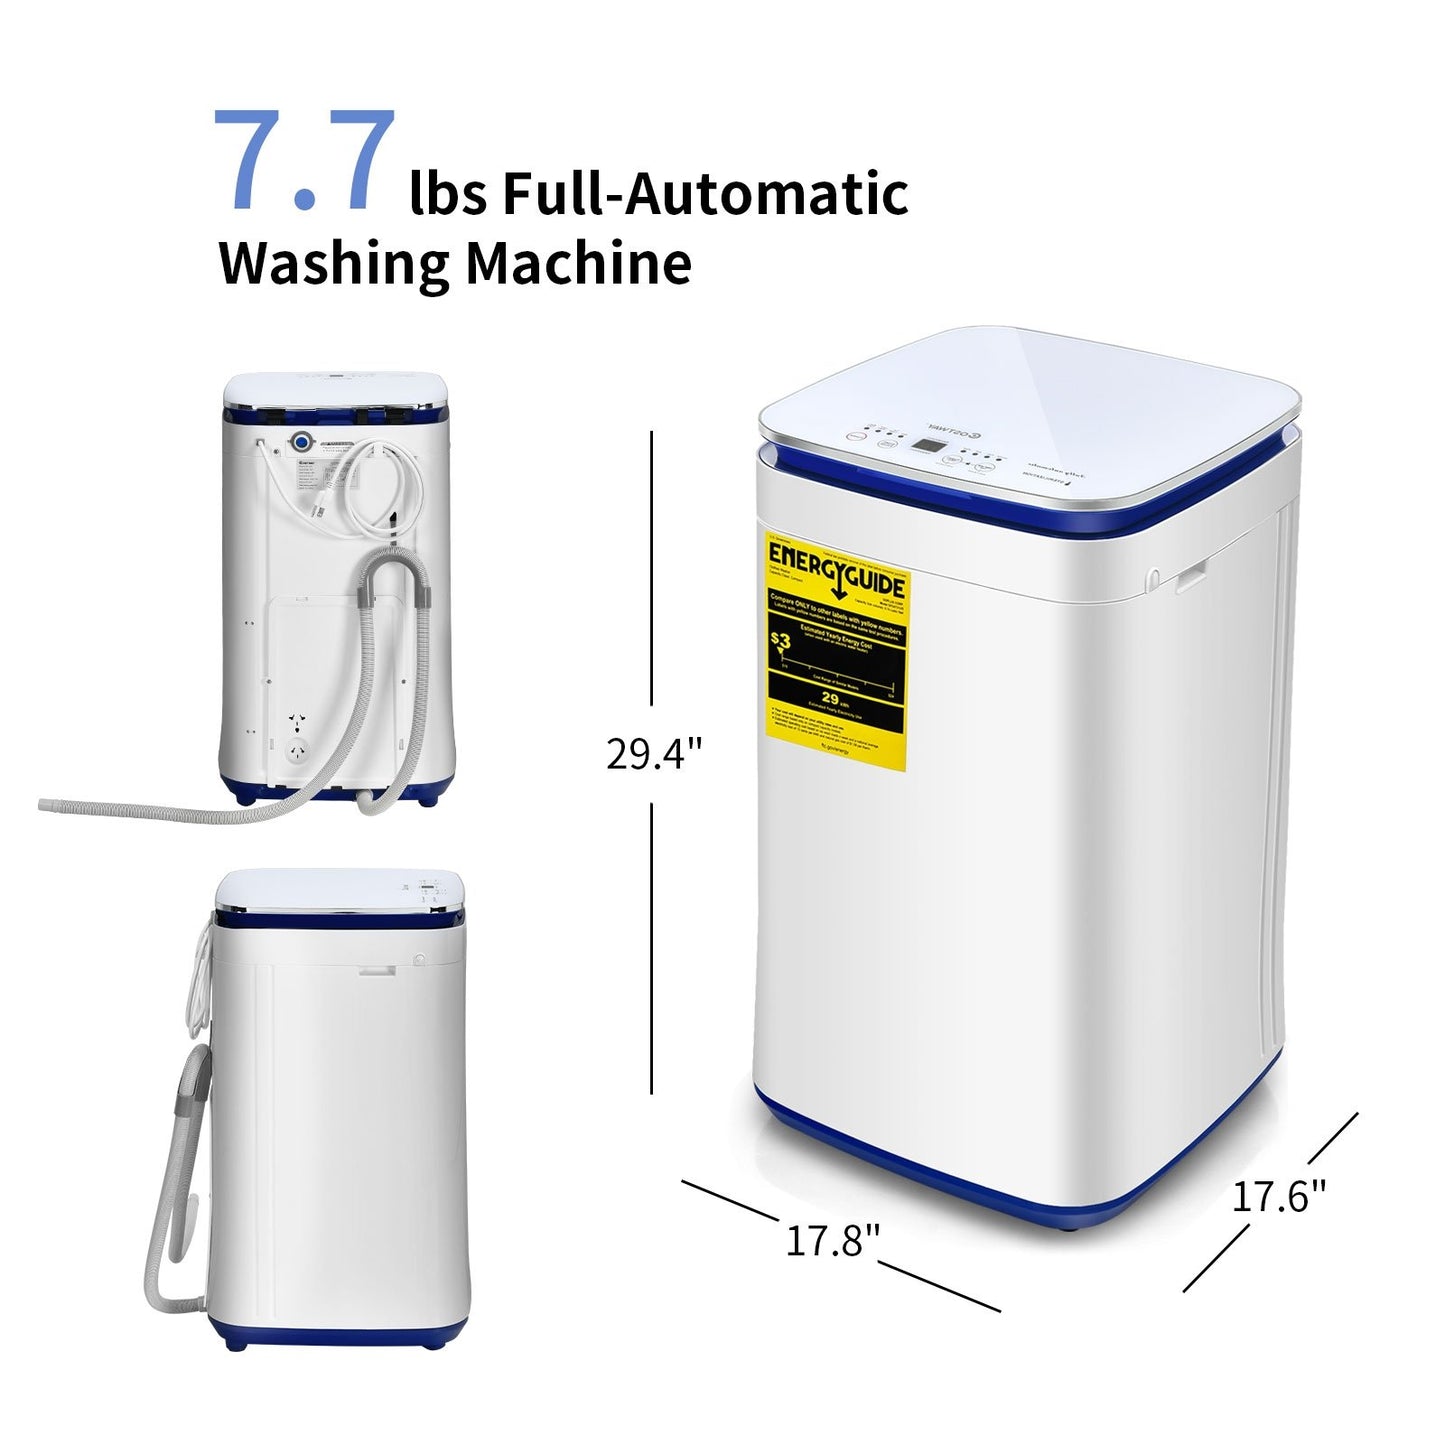 7.7 lbs Compact Full Automatic Washing Machine with Heating Function Pump, White